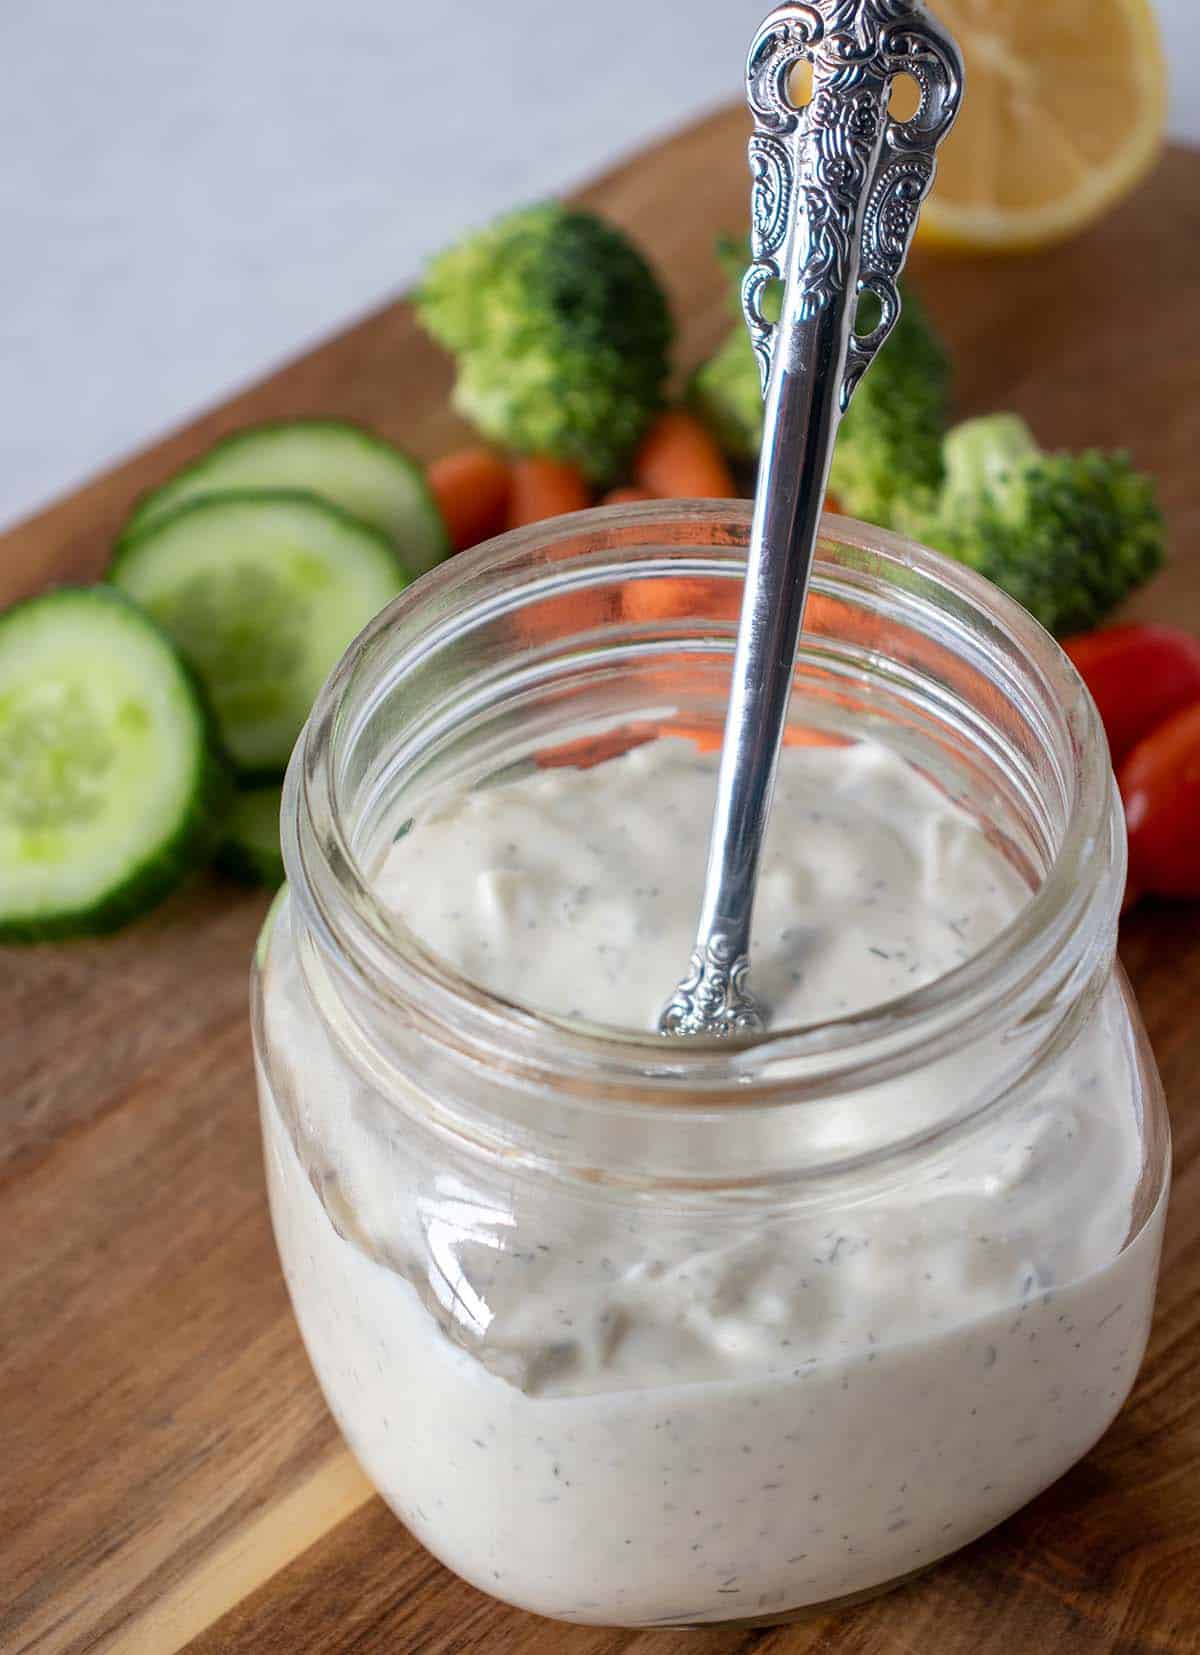 Homemade ranch dip in a clear glass jar with a silver spoon. Fresh veggies including cucumber slices, broccoli, carrots, tomatoes and a lemon slice in the background.